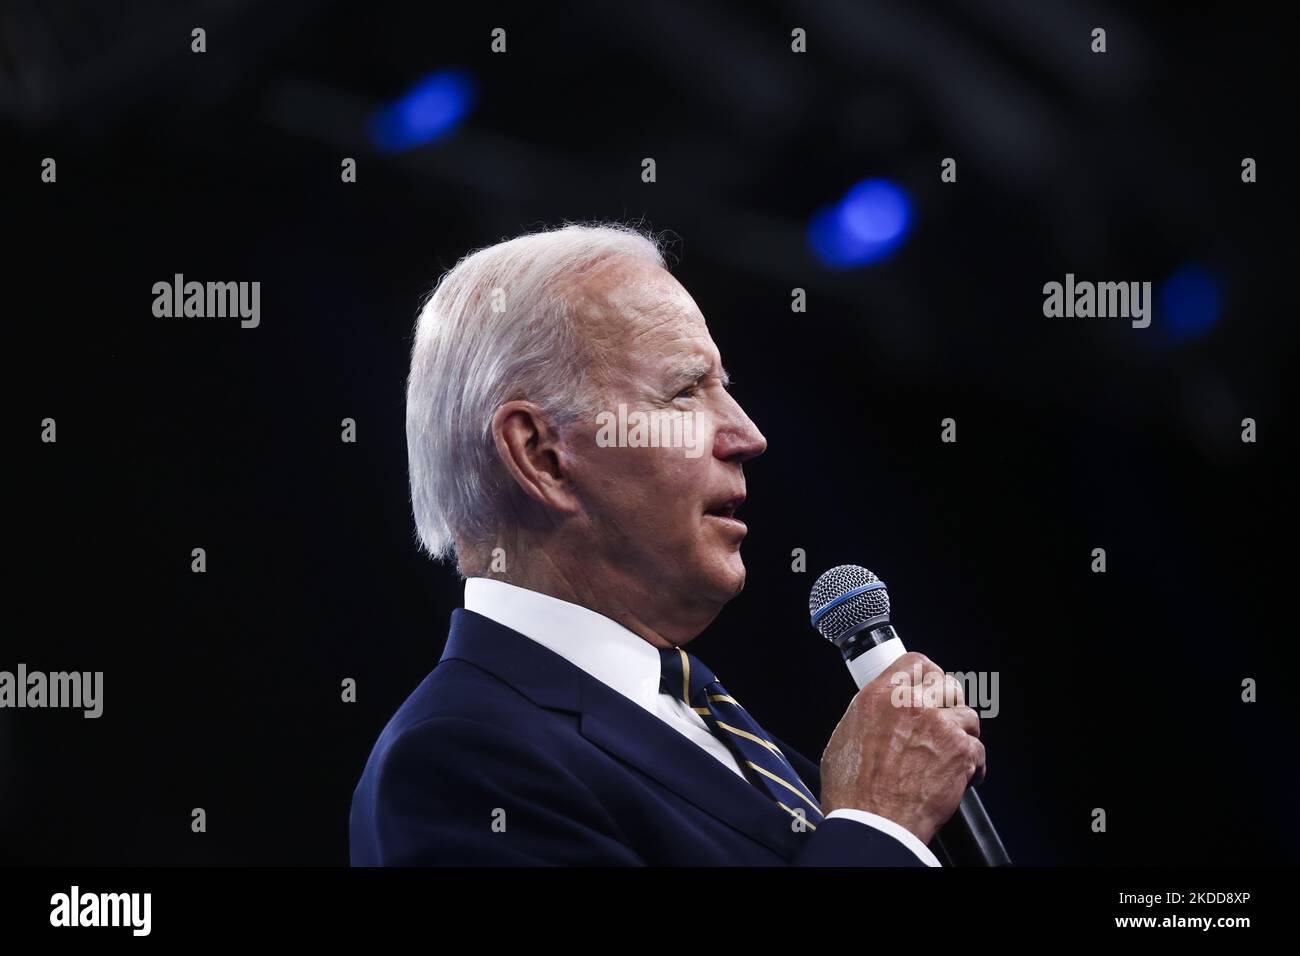 U.S. President Joe Biden is holding a press conference during the NATO Summit at the IFEMA congress centre in Madrid, Spain on June 30, 2022. (Photo by Beata Zawrzel/NurPhoto) Stock Photo